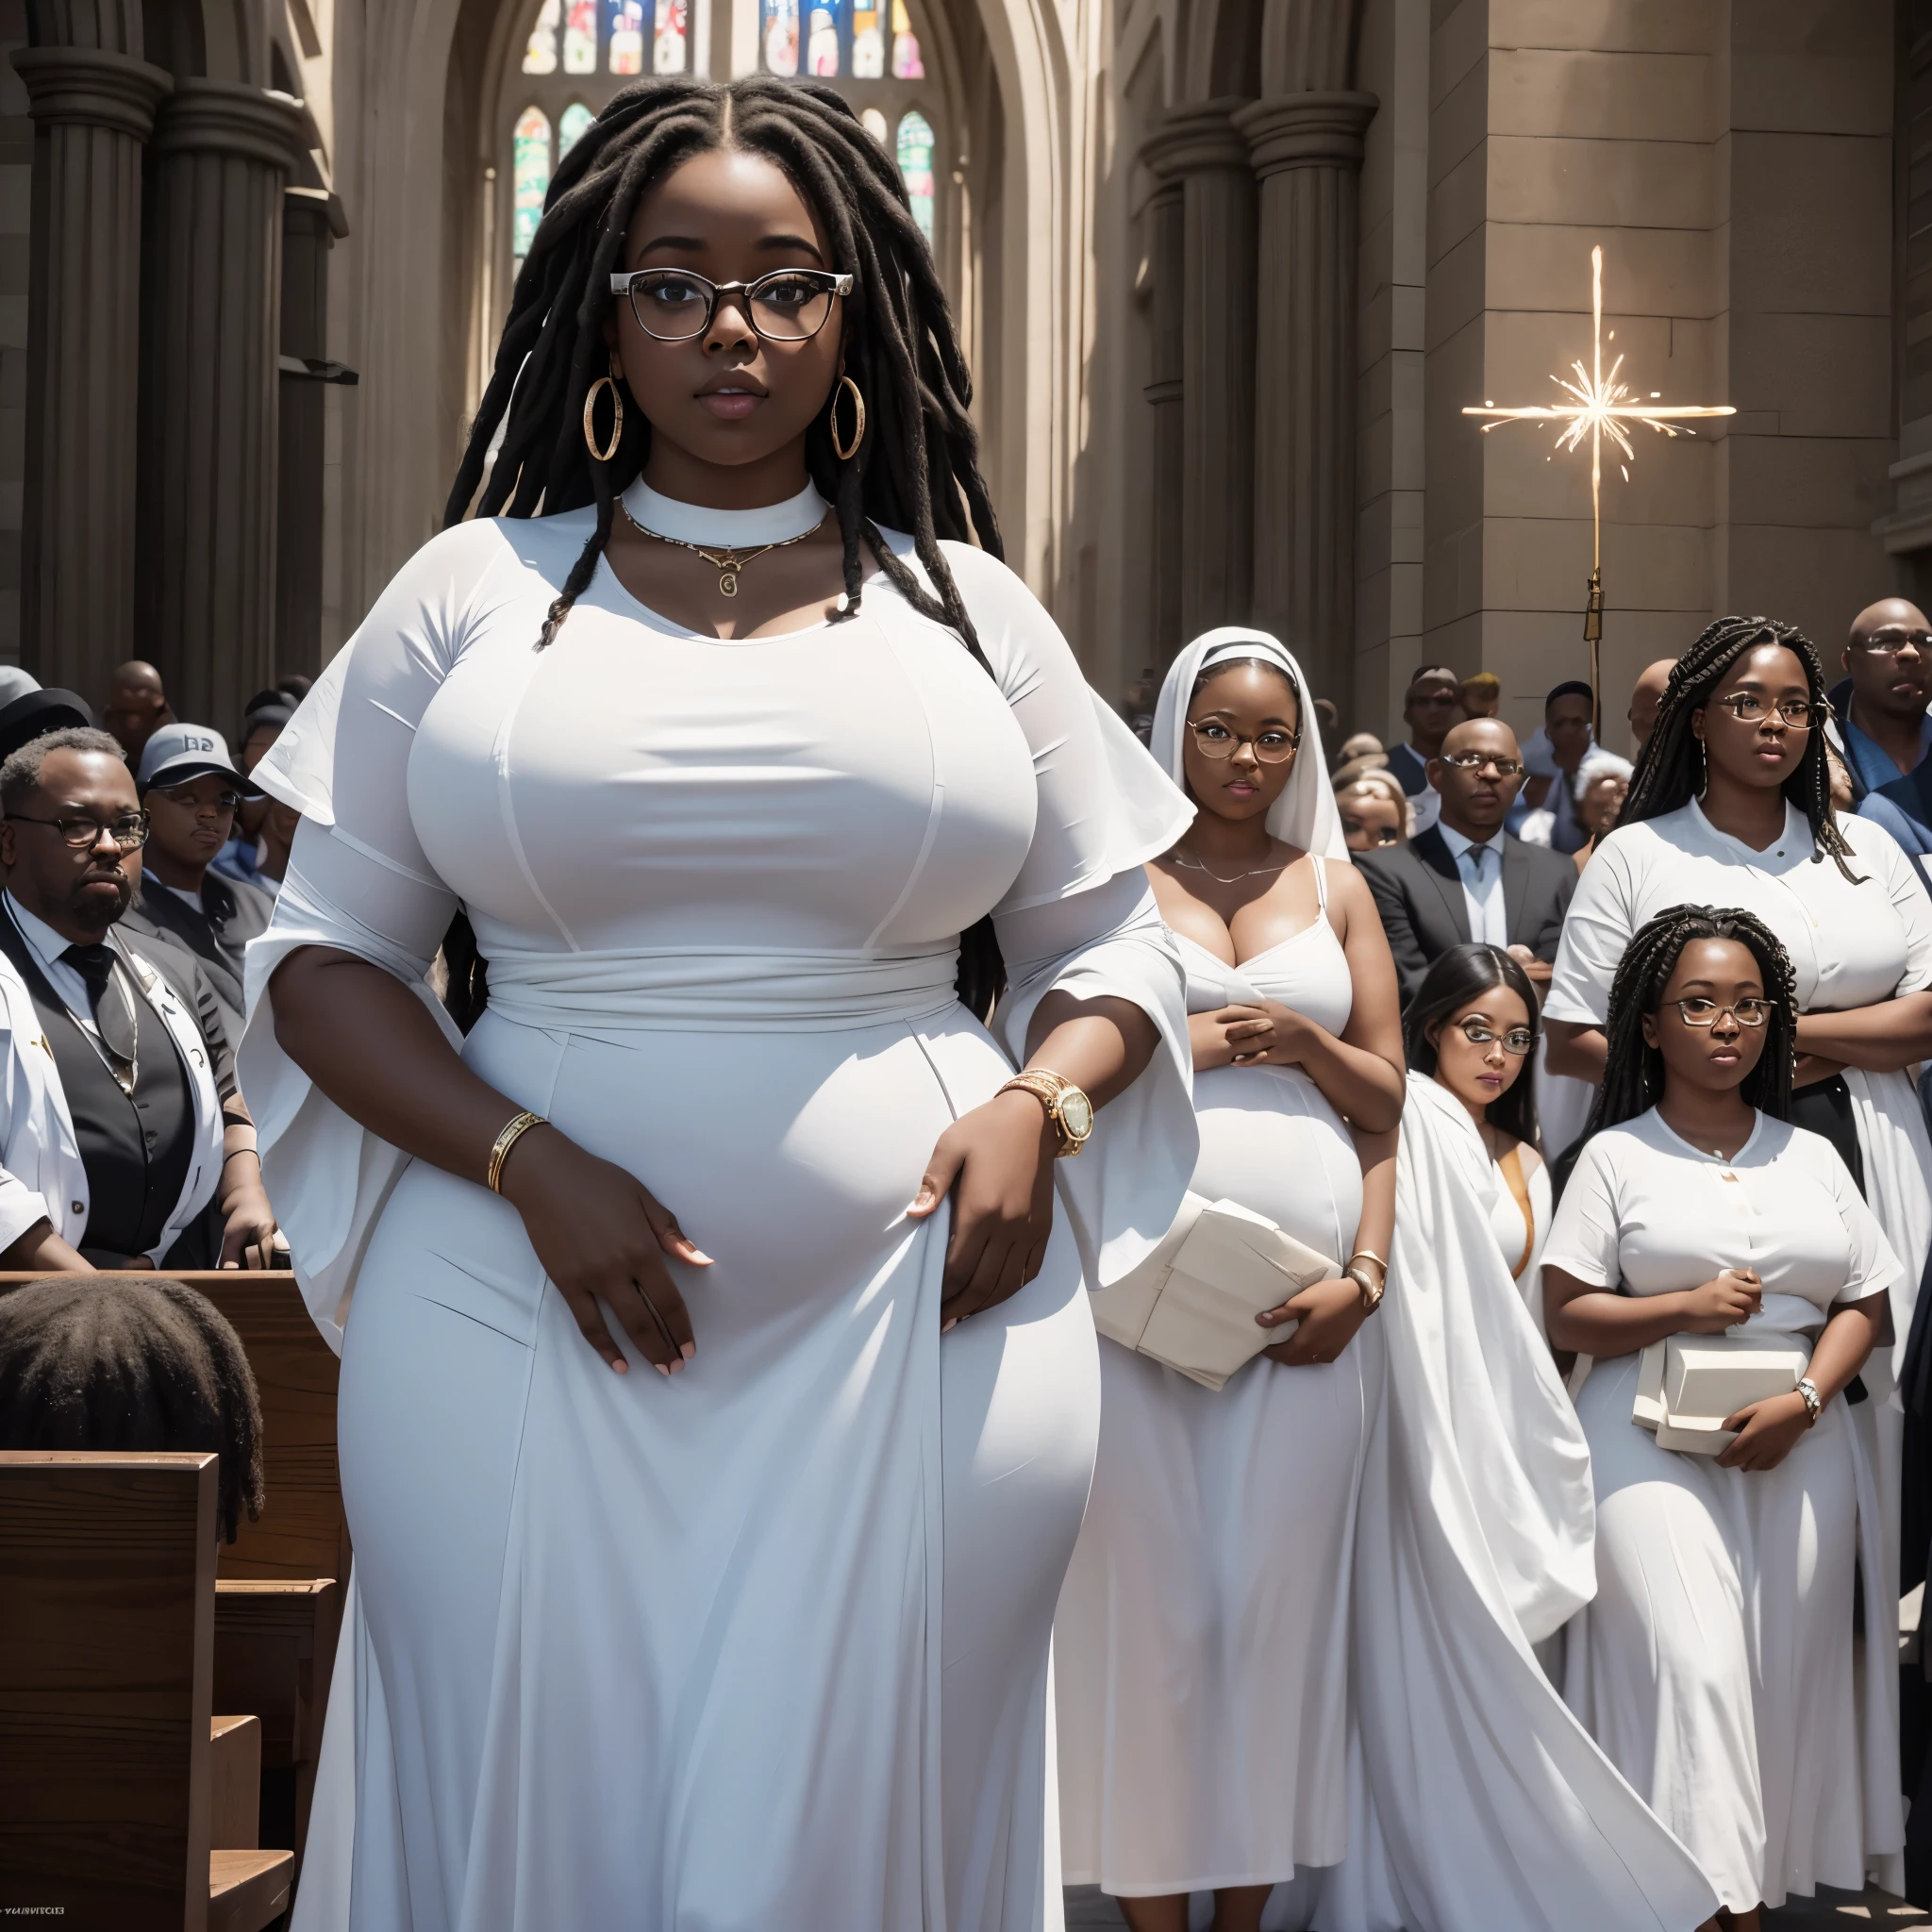 masterpiece, 8k, ultra high definition, unreal engine, ultra detailed, ultra high resolution, ultra focus, beautiful fat girl, black girl, round face, curvy body, dreadlocks, dark skin, glasses, wearing a white long white african dress, in front of church, 31st night, people in the background all wearing white, fireworks, detailed background